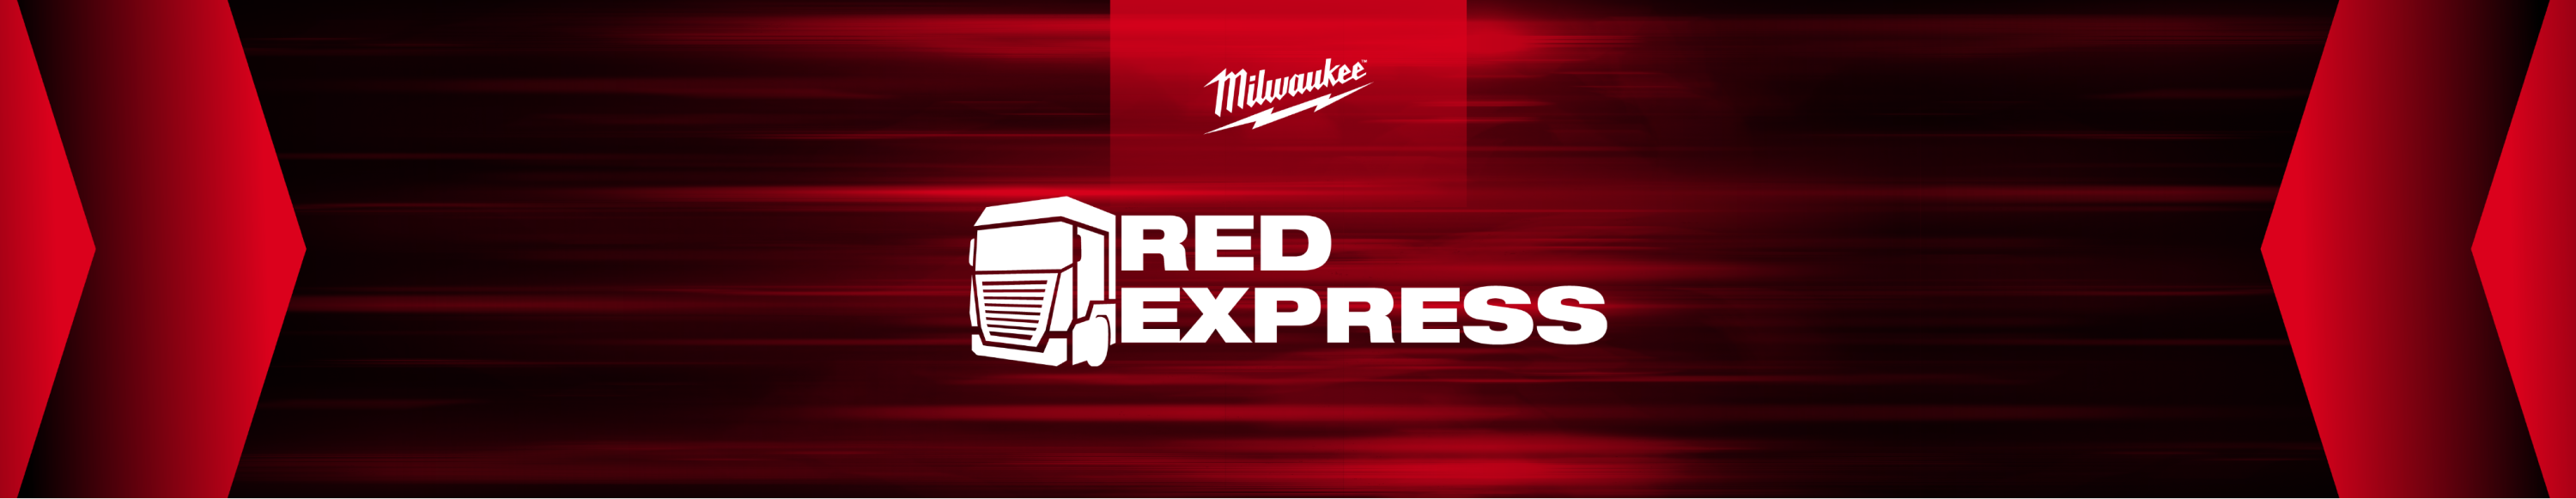 Red Express